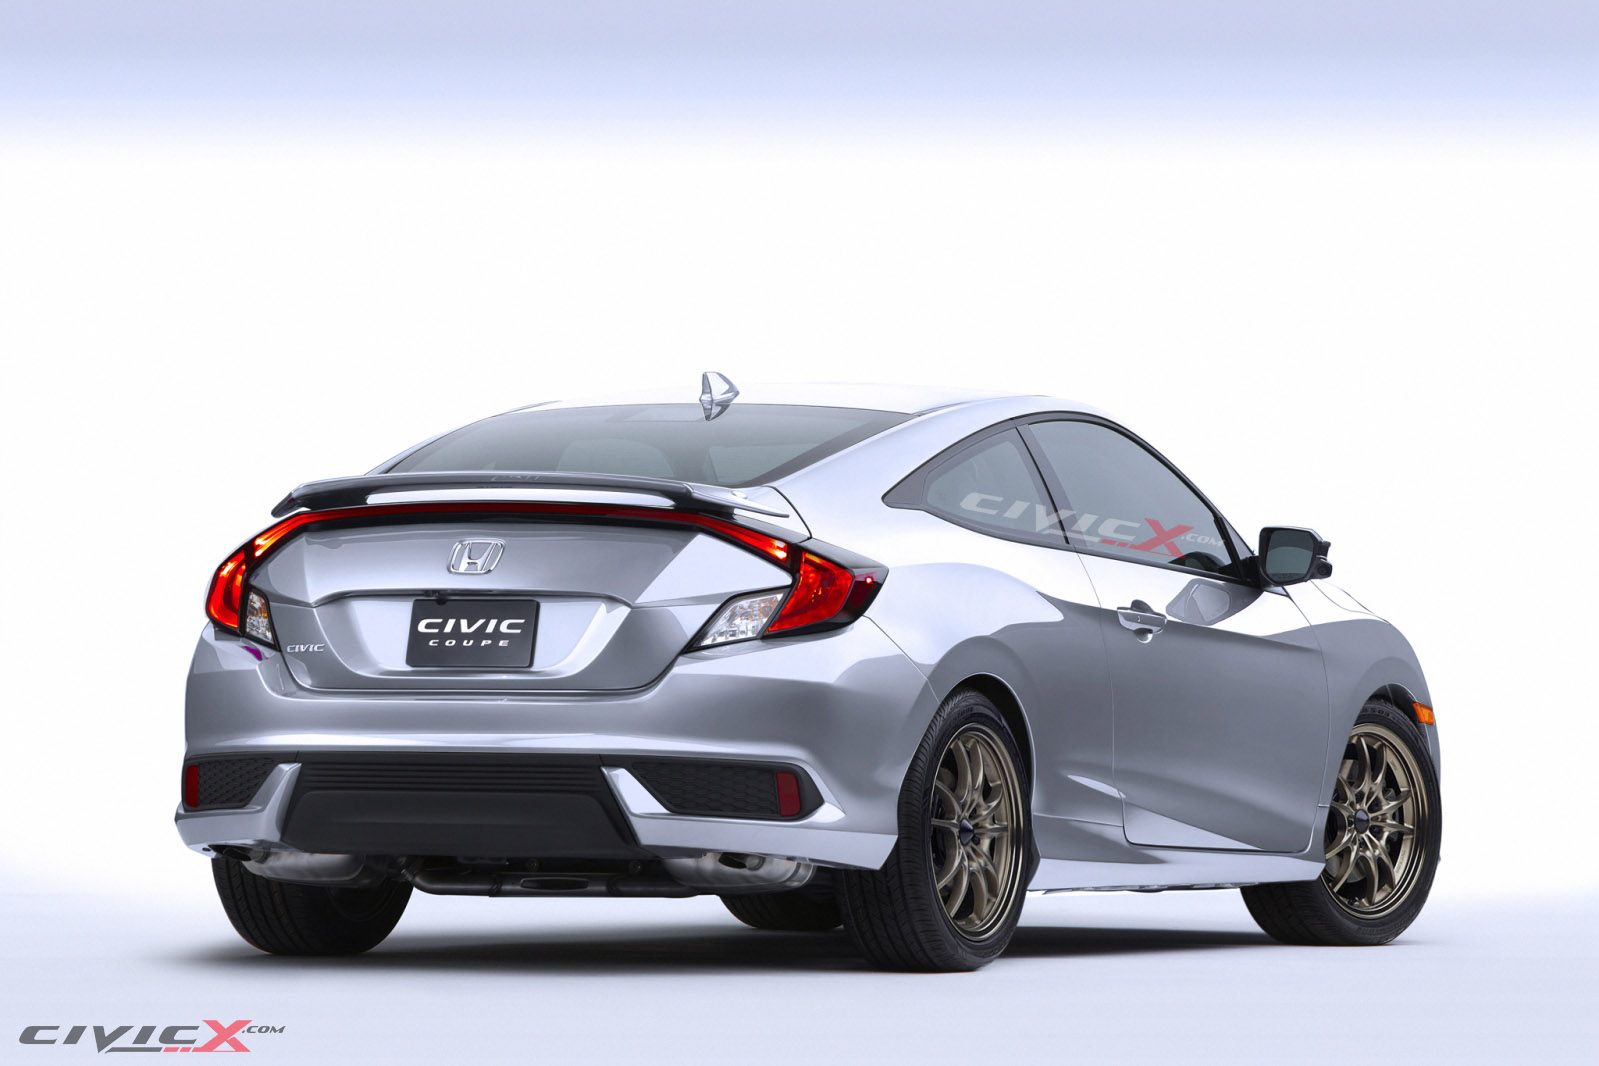 Honda Civic 10th gen 2016 Civic Coupe modified in different colors, wheels, brakes (updated w/ more angles and wheels) modified-2016-civic-coupe-aftermarketwheels-quarter-2-